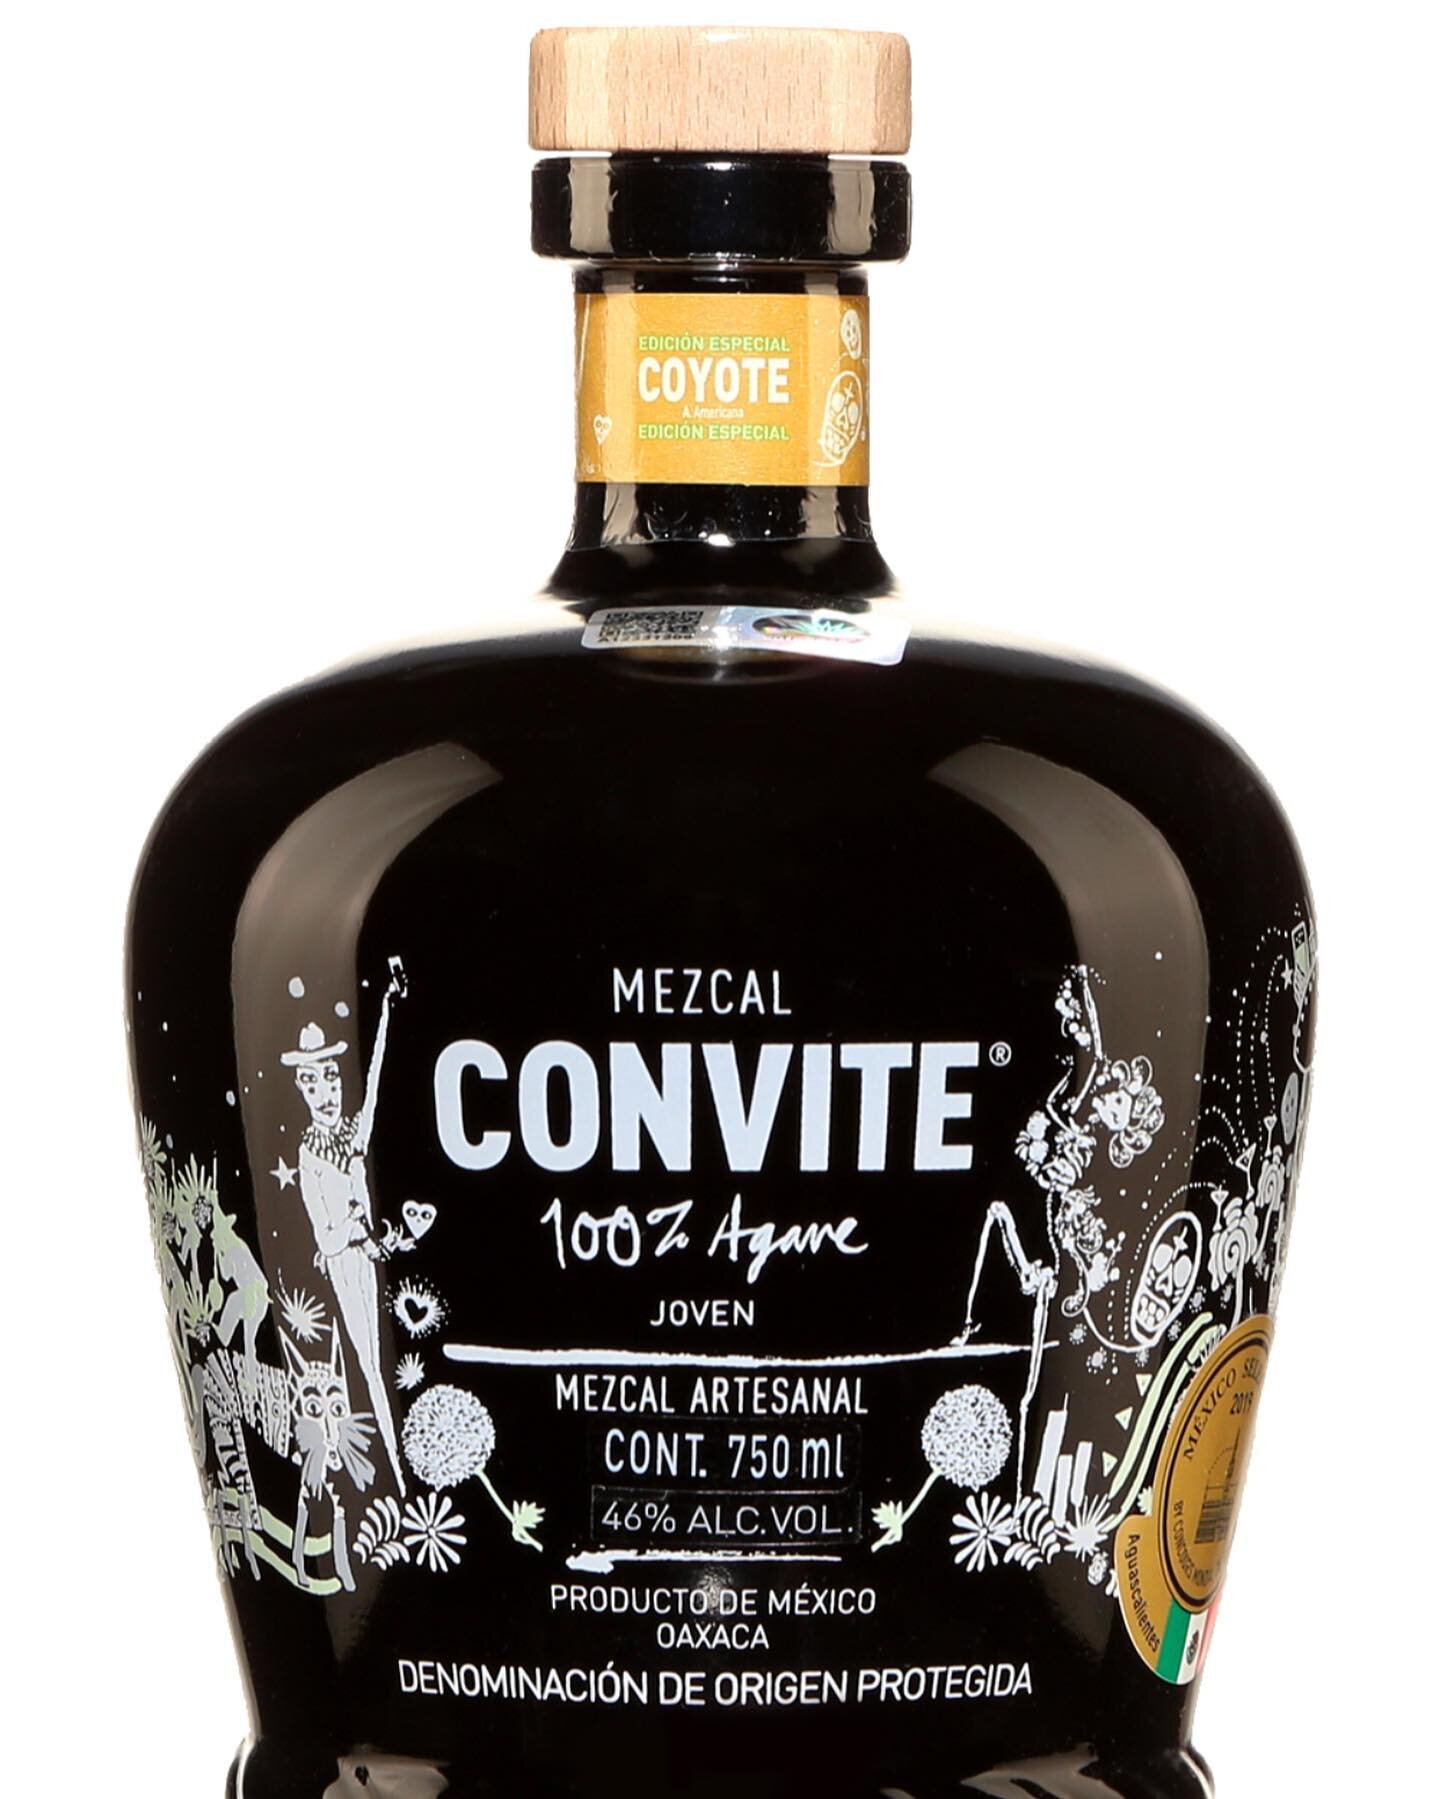 Convite special Edition 
Saq code: 15082213

* 100% wild Coyote agave.
* Elaborated in the traditional way from the finest capon agaves.
* Naturally fermented with spring water.
* Chemical-free and no added flavors.
* Double discontinued distillation